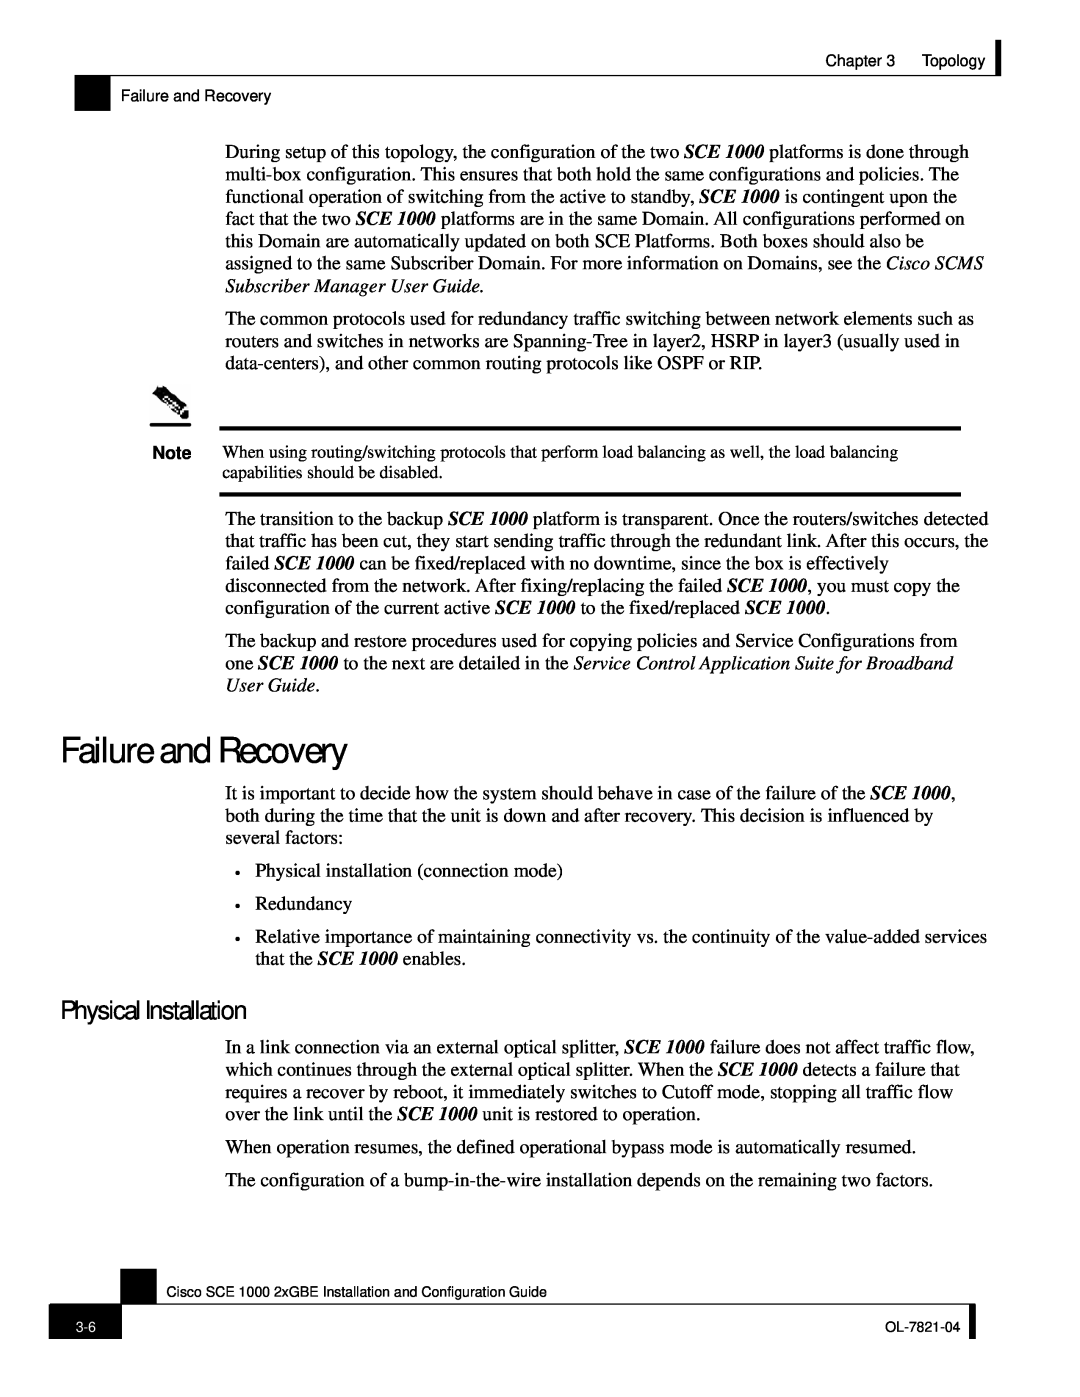 Cisco Systems OL-7821-04, SCE 1000 2xGBE manual Failure and Recovery, Physical Installation 